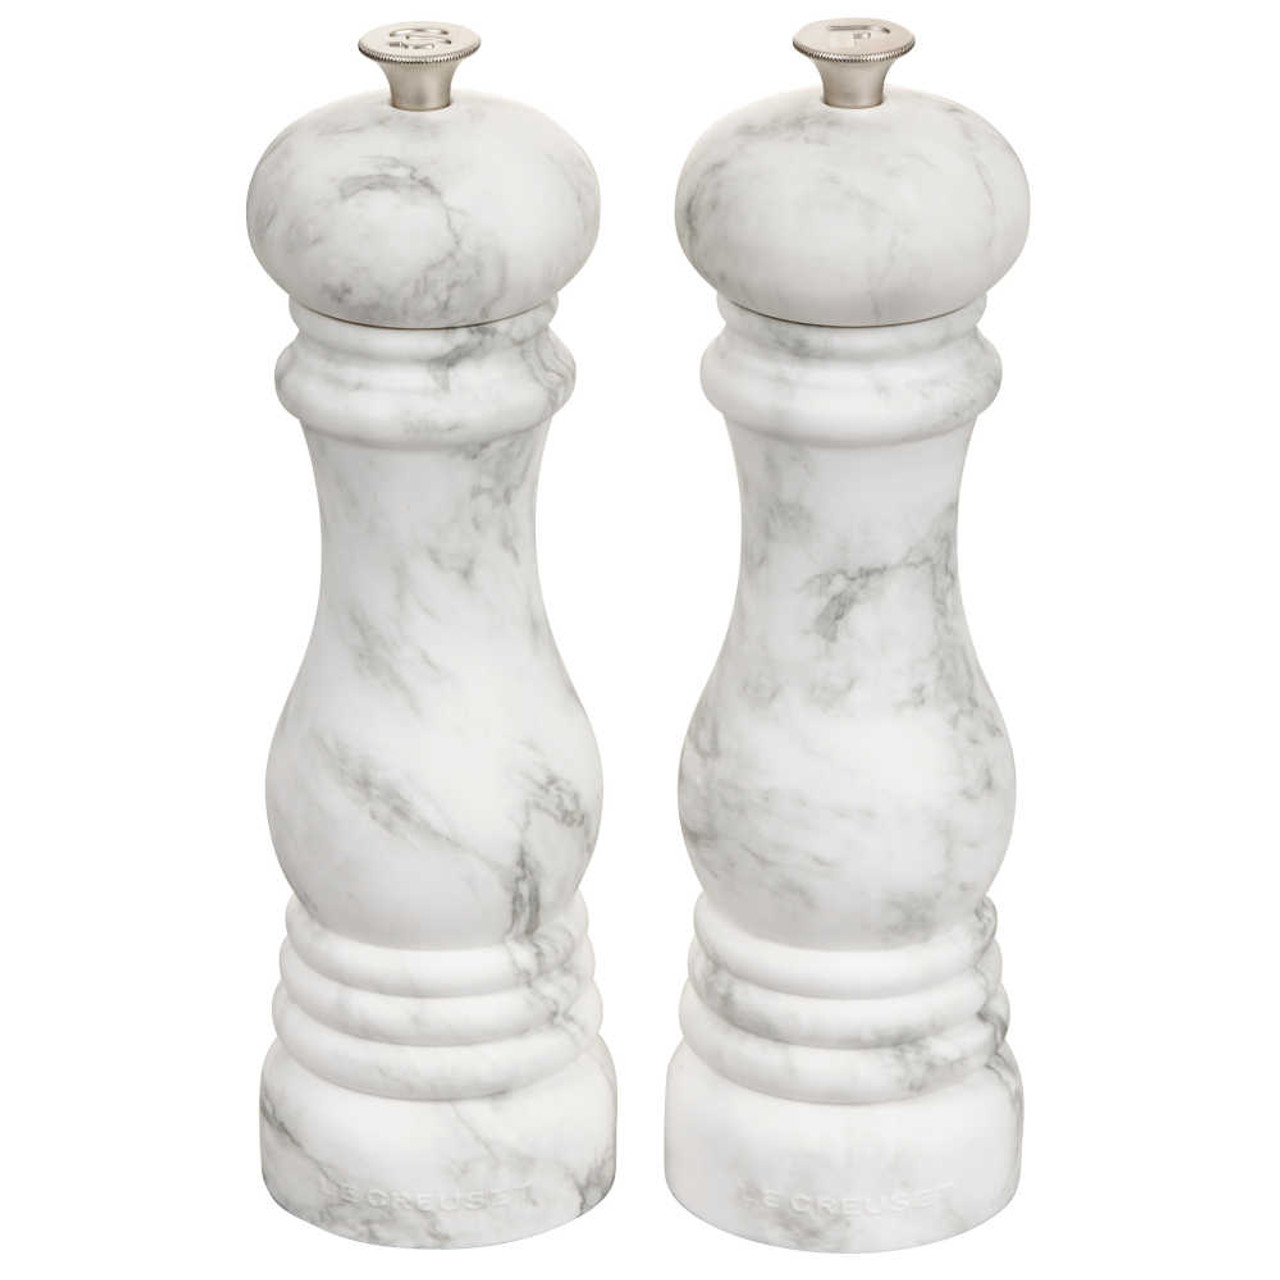 https://cdn11.bigcommerce.com/s-hccytny0od/images/stencil/1280x1280/products/5498/23907/Le_Creuset_Marble_Collection_Salt_and_Pepper_Mill_Set__49012.1685131244.jpg?c=2?imbypass=on